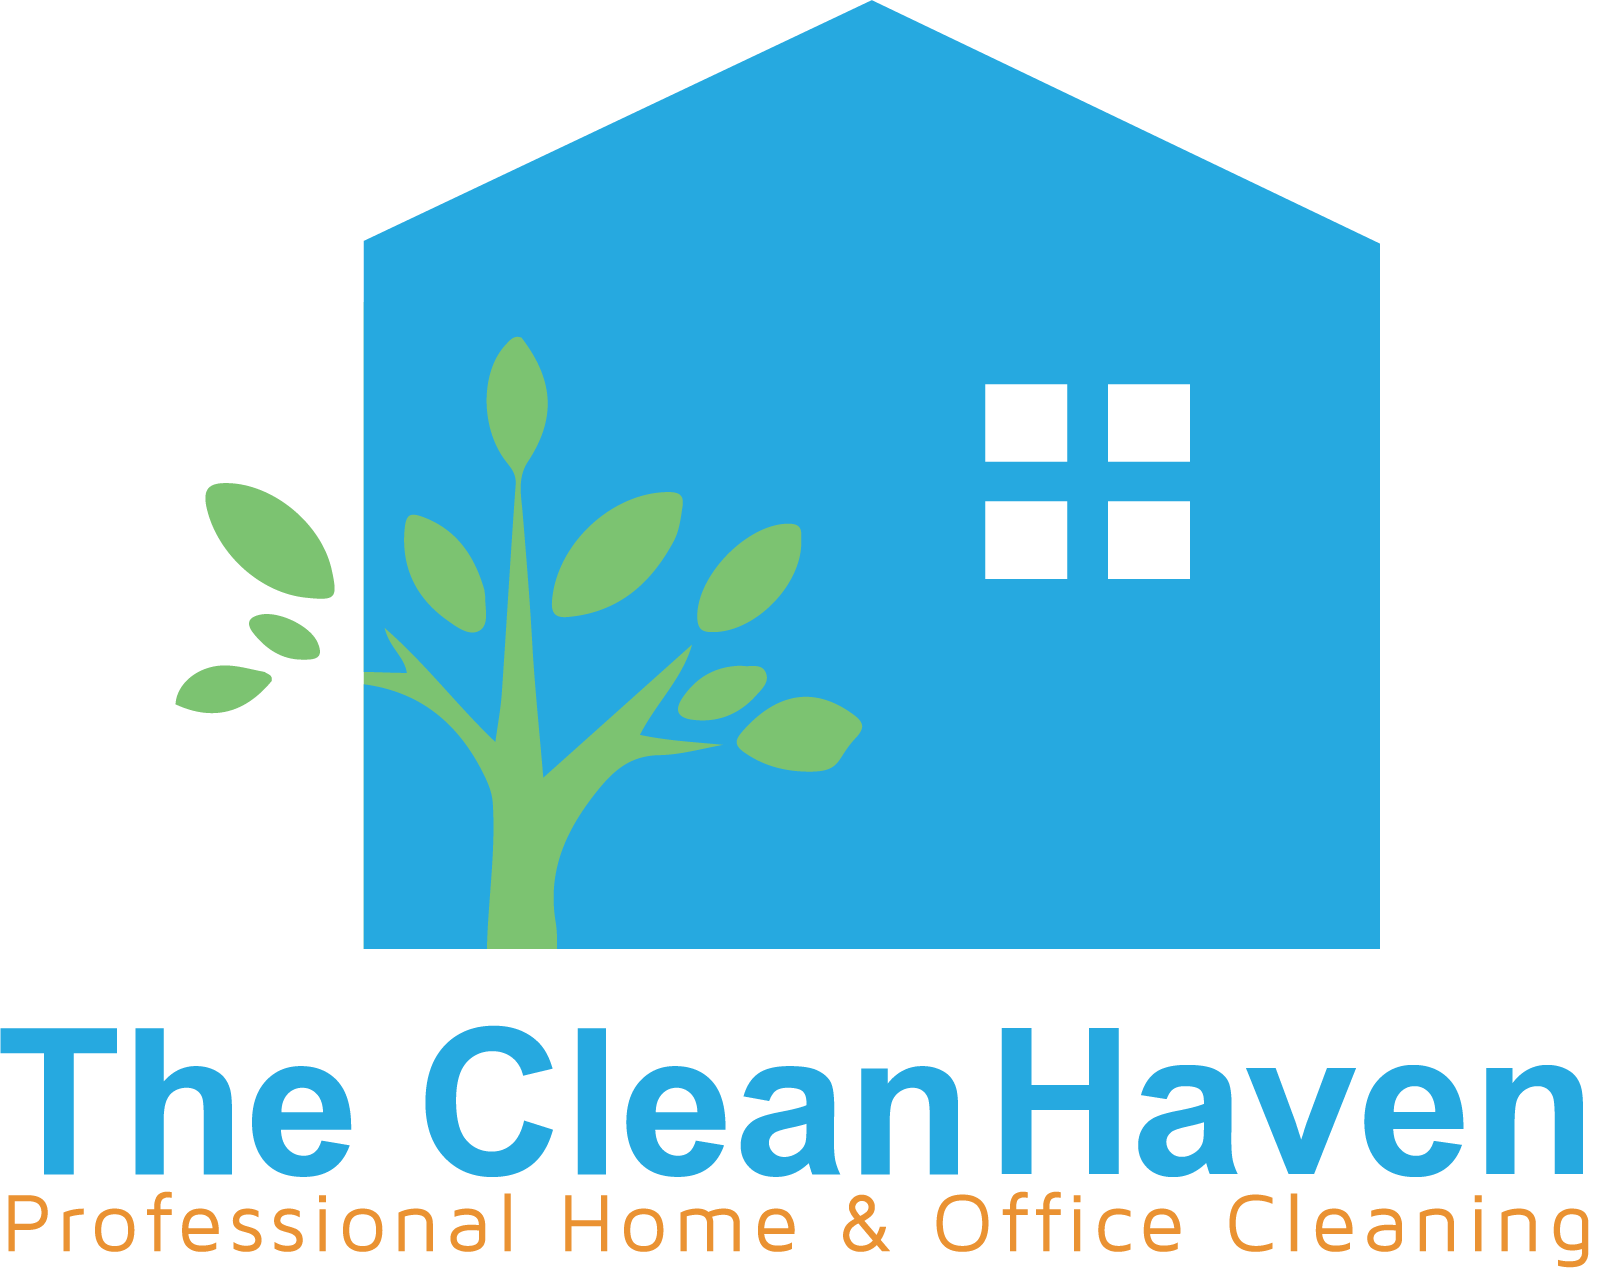 https://thecleanhaven.com/wp-content/uploads/2020/07/the-clean-haven-square.png